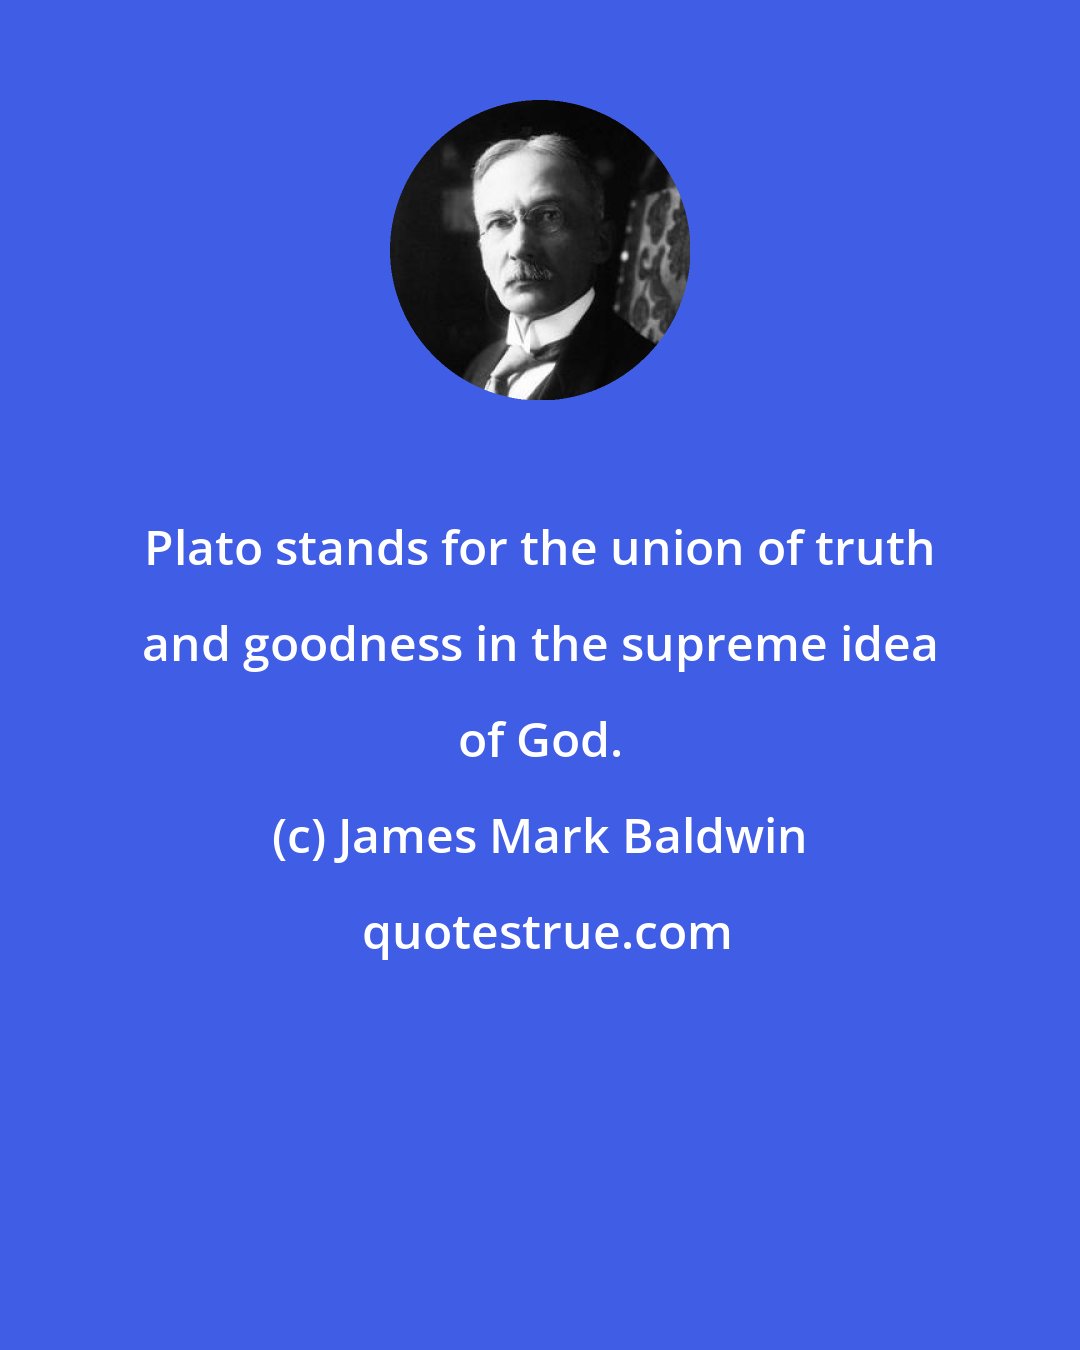 James Mark Baldwin: Plato stands for the union of truth and goodness in the supreme idea of God.